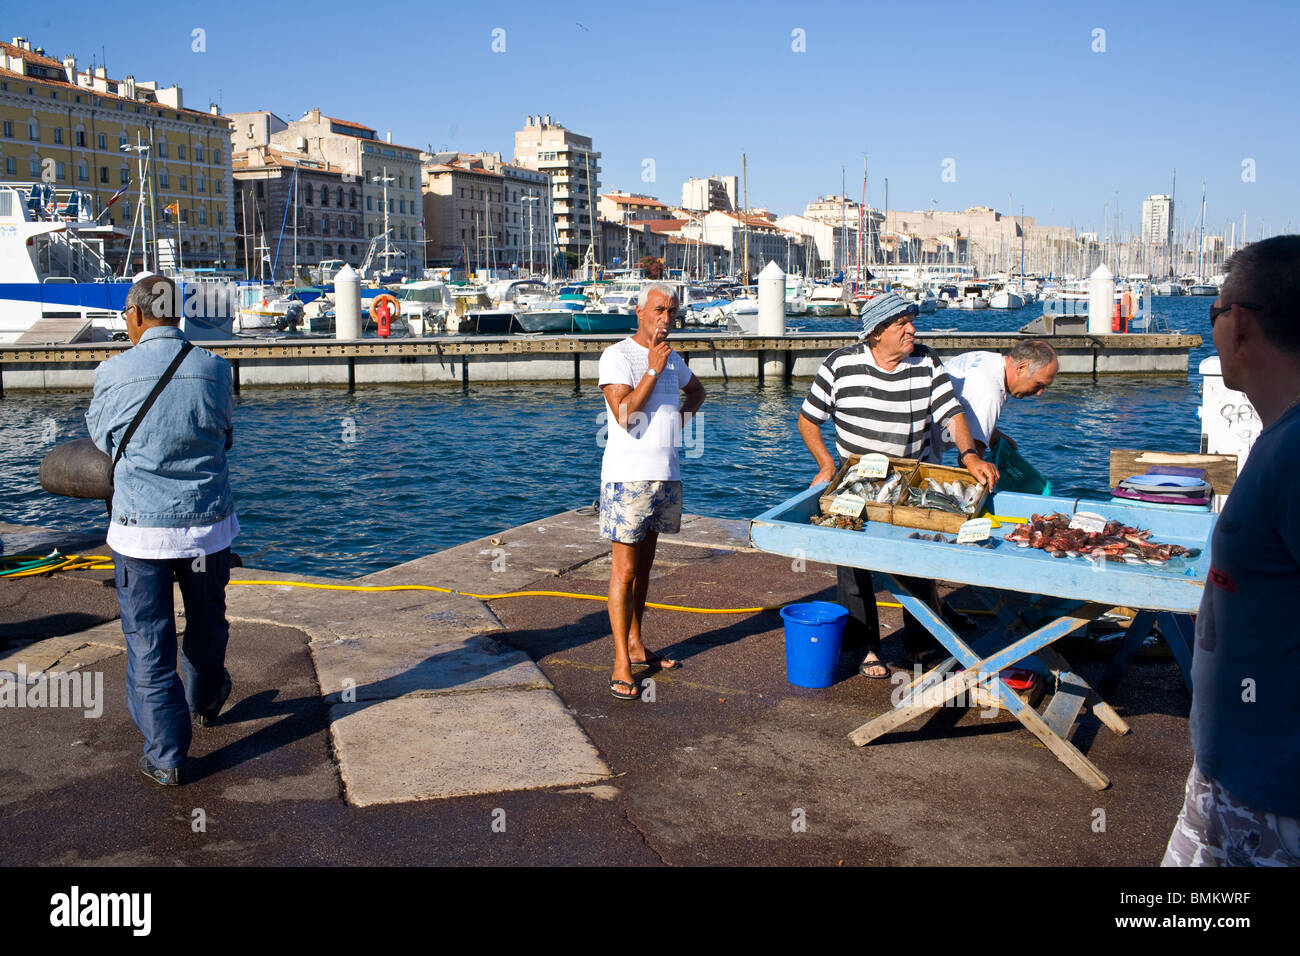 Fishermen selling the mornings catch on the old port of Marseille, France. Stock Photo